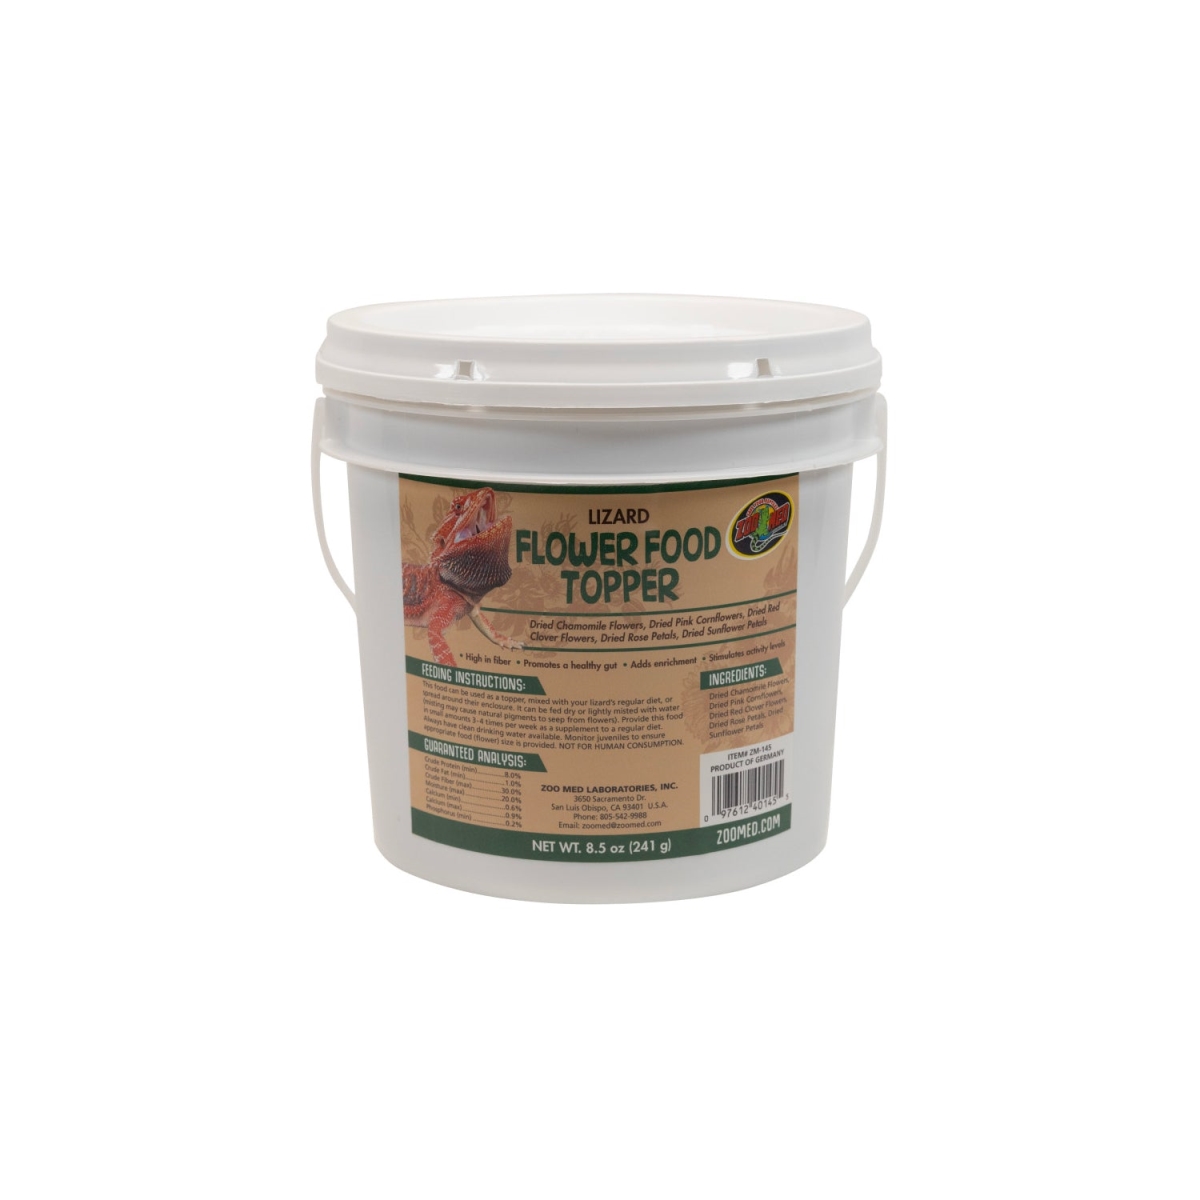 Picture of Zoo Med 097612401455 8.5 oz Lizard Flower Food Topper